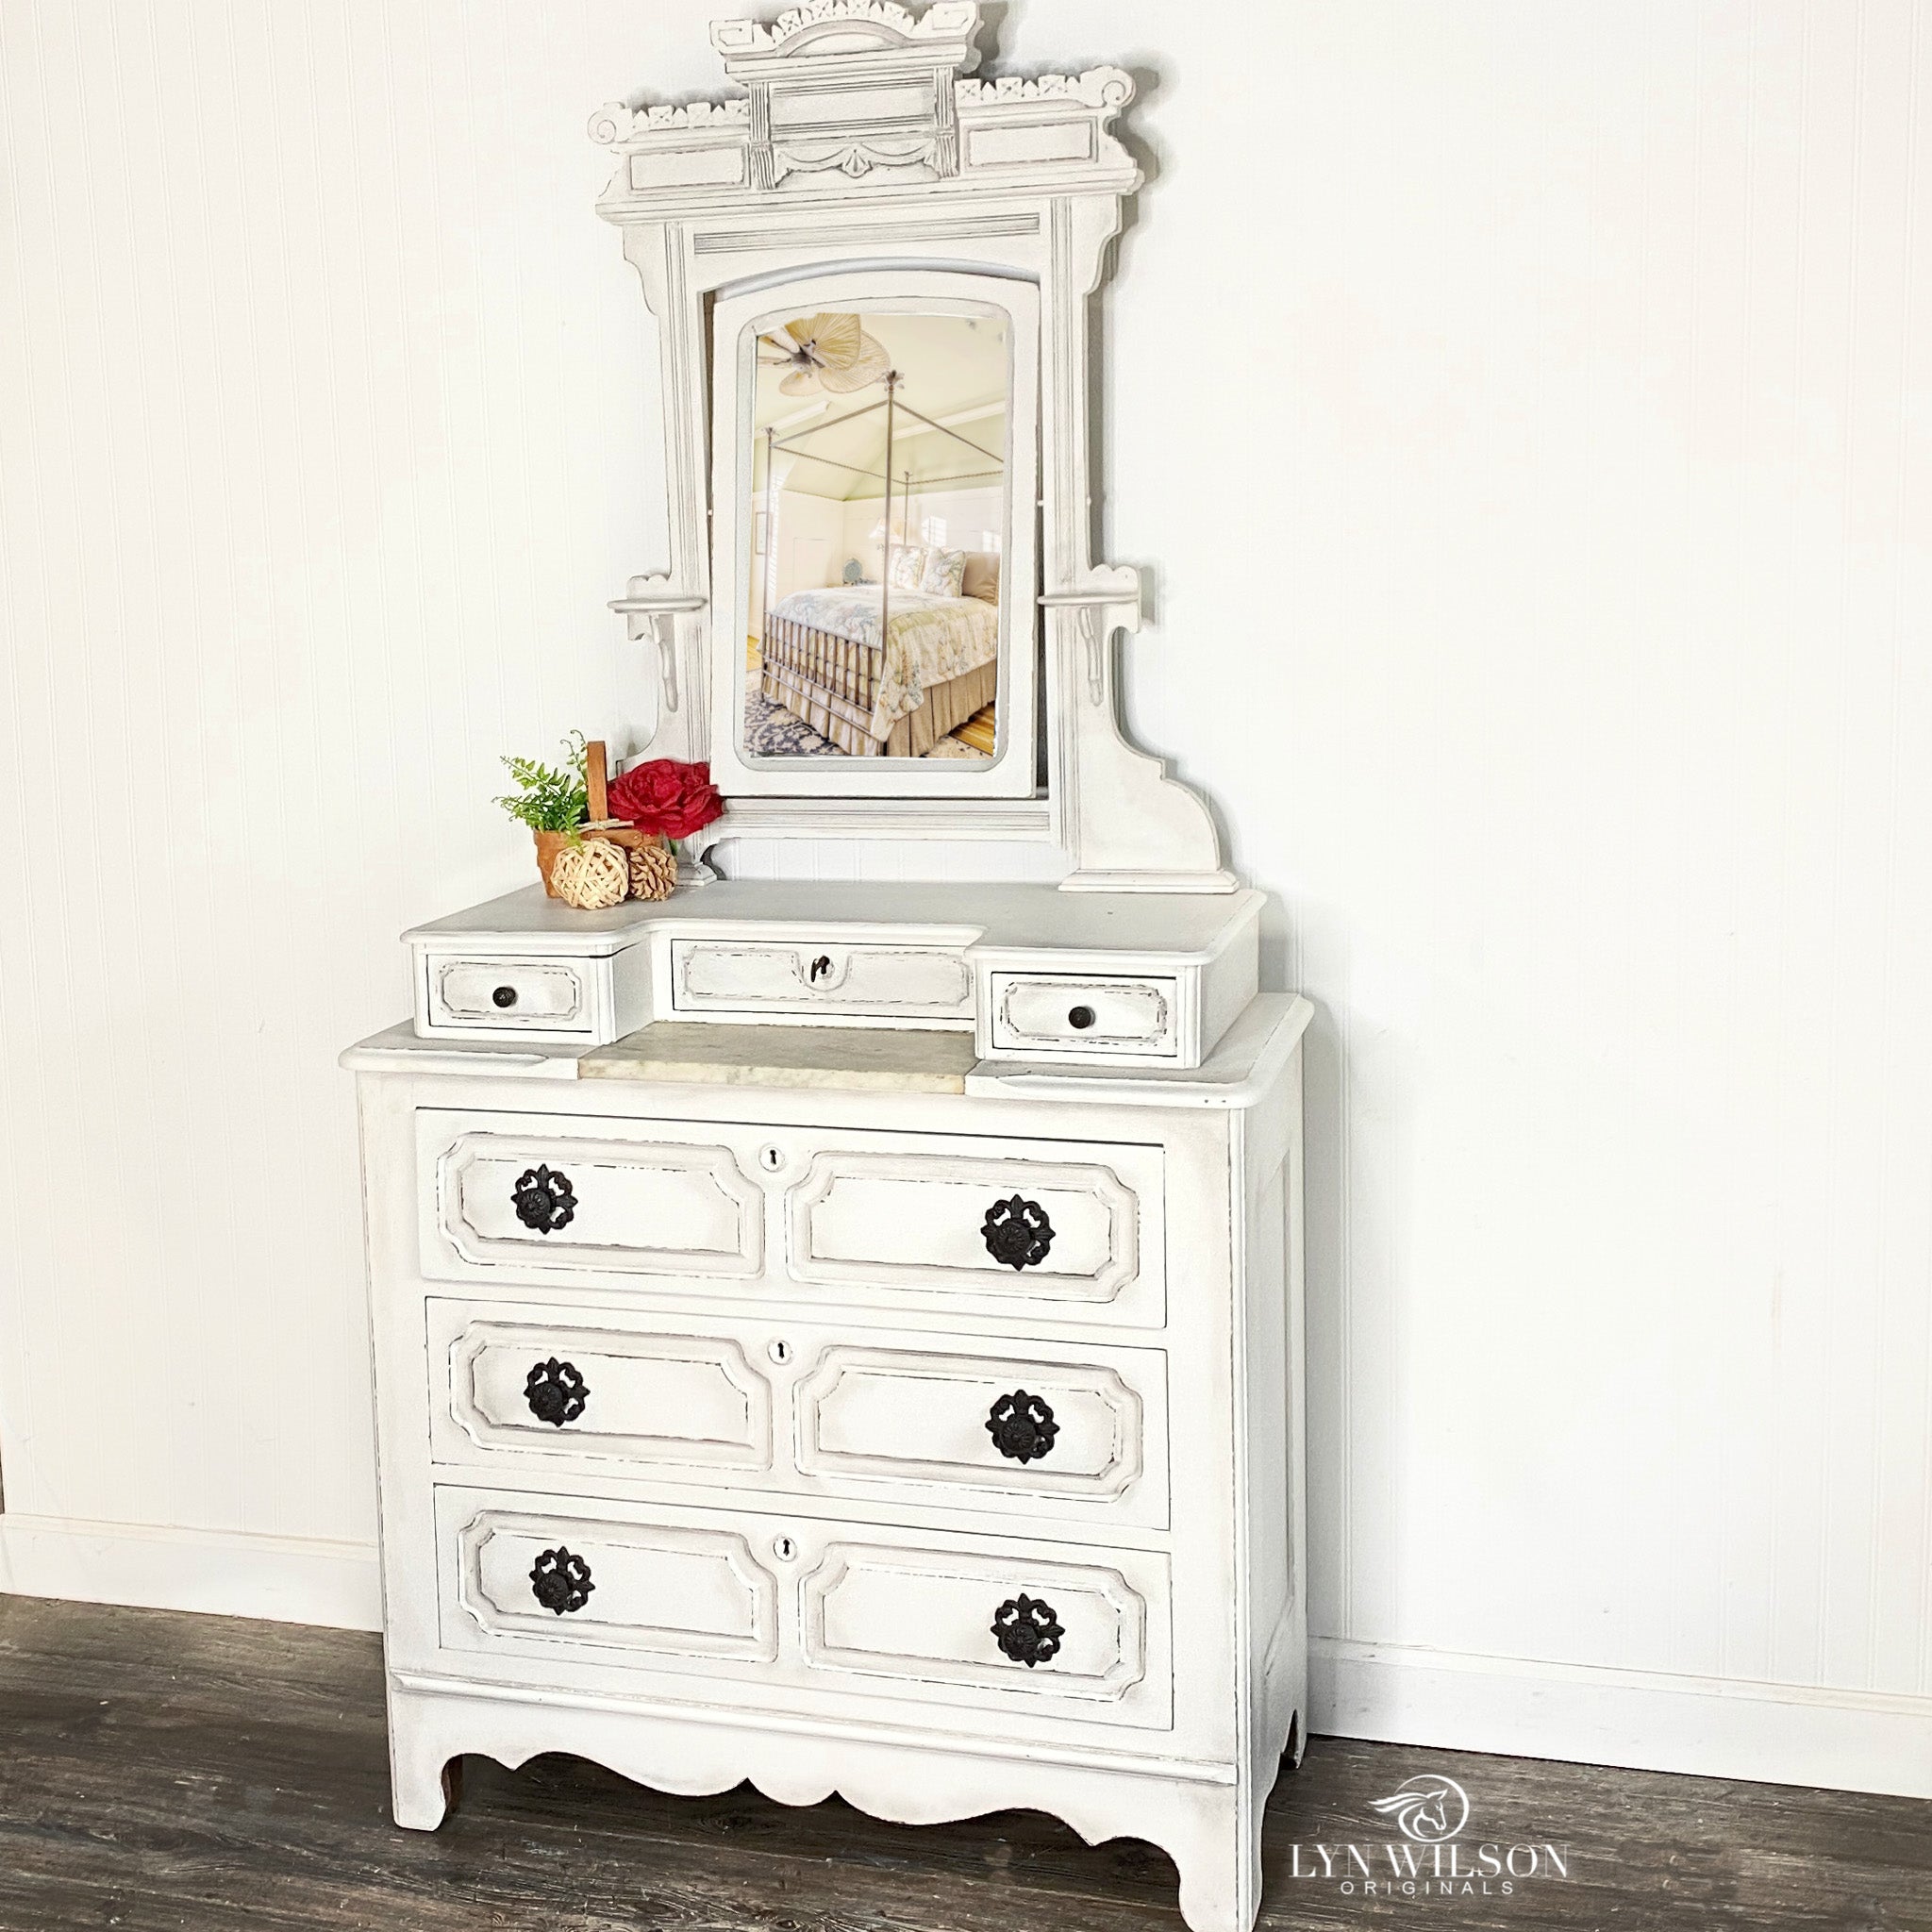 A vintage lingerie dresser with a mirror refurbished by Lyn Wilson is painted in Dixie Belle's Fluff chalk mineral paint.